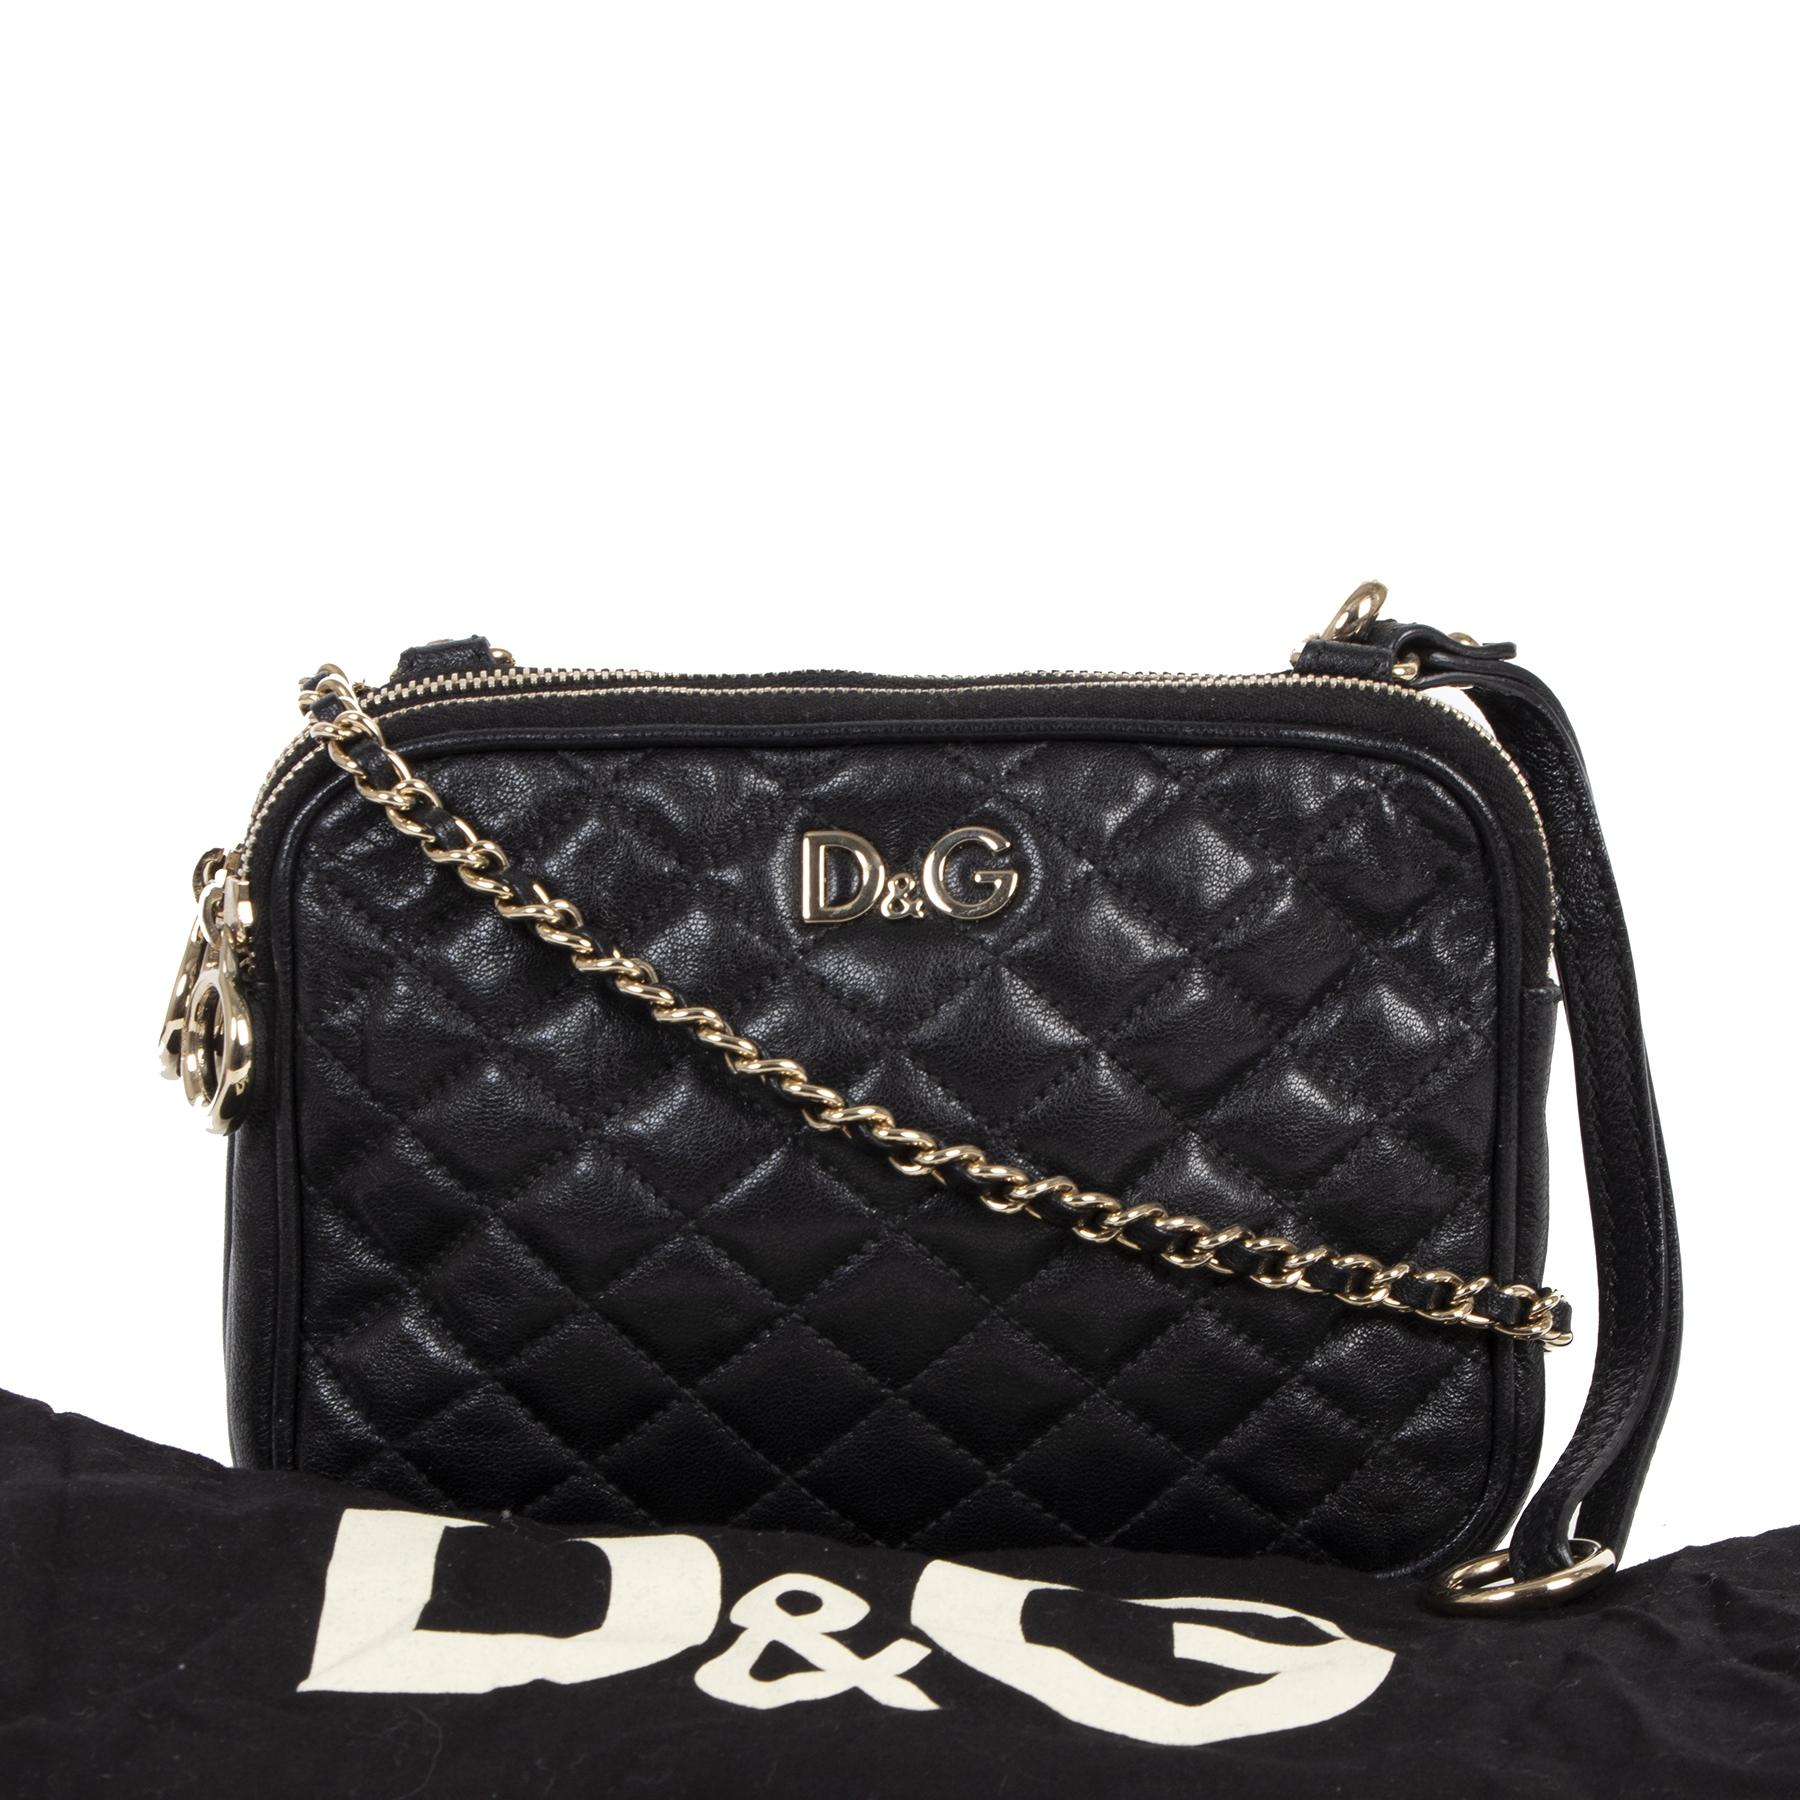 Very good condition

Dolce & Gabbana Lily Glam Black Crossbody Bag

Take your evening looks to a whole new level and get this Dolce & Gabbana crossbody bag. The bag is crafted out of black quilted leather and is beautifully finished with gold-toned